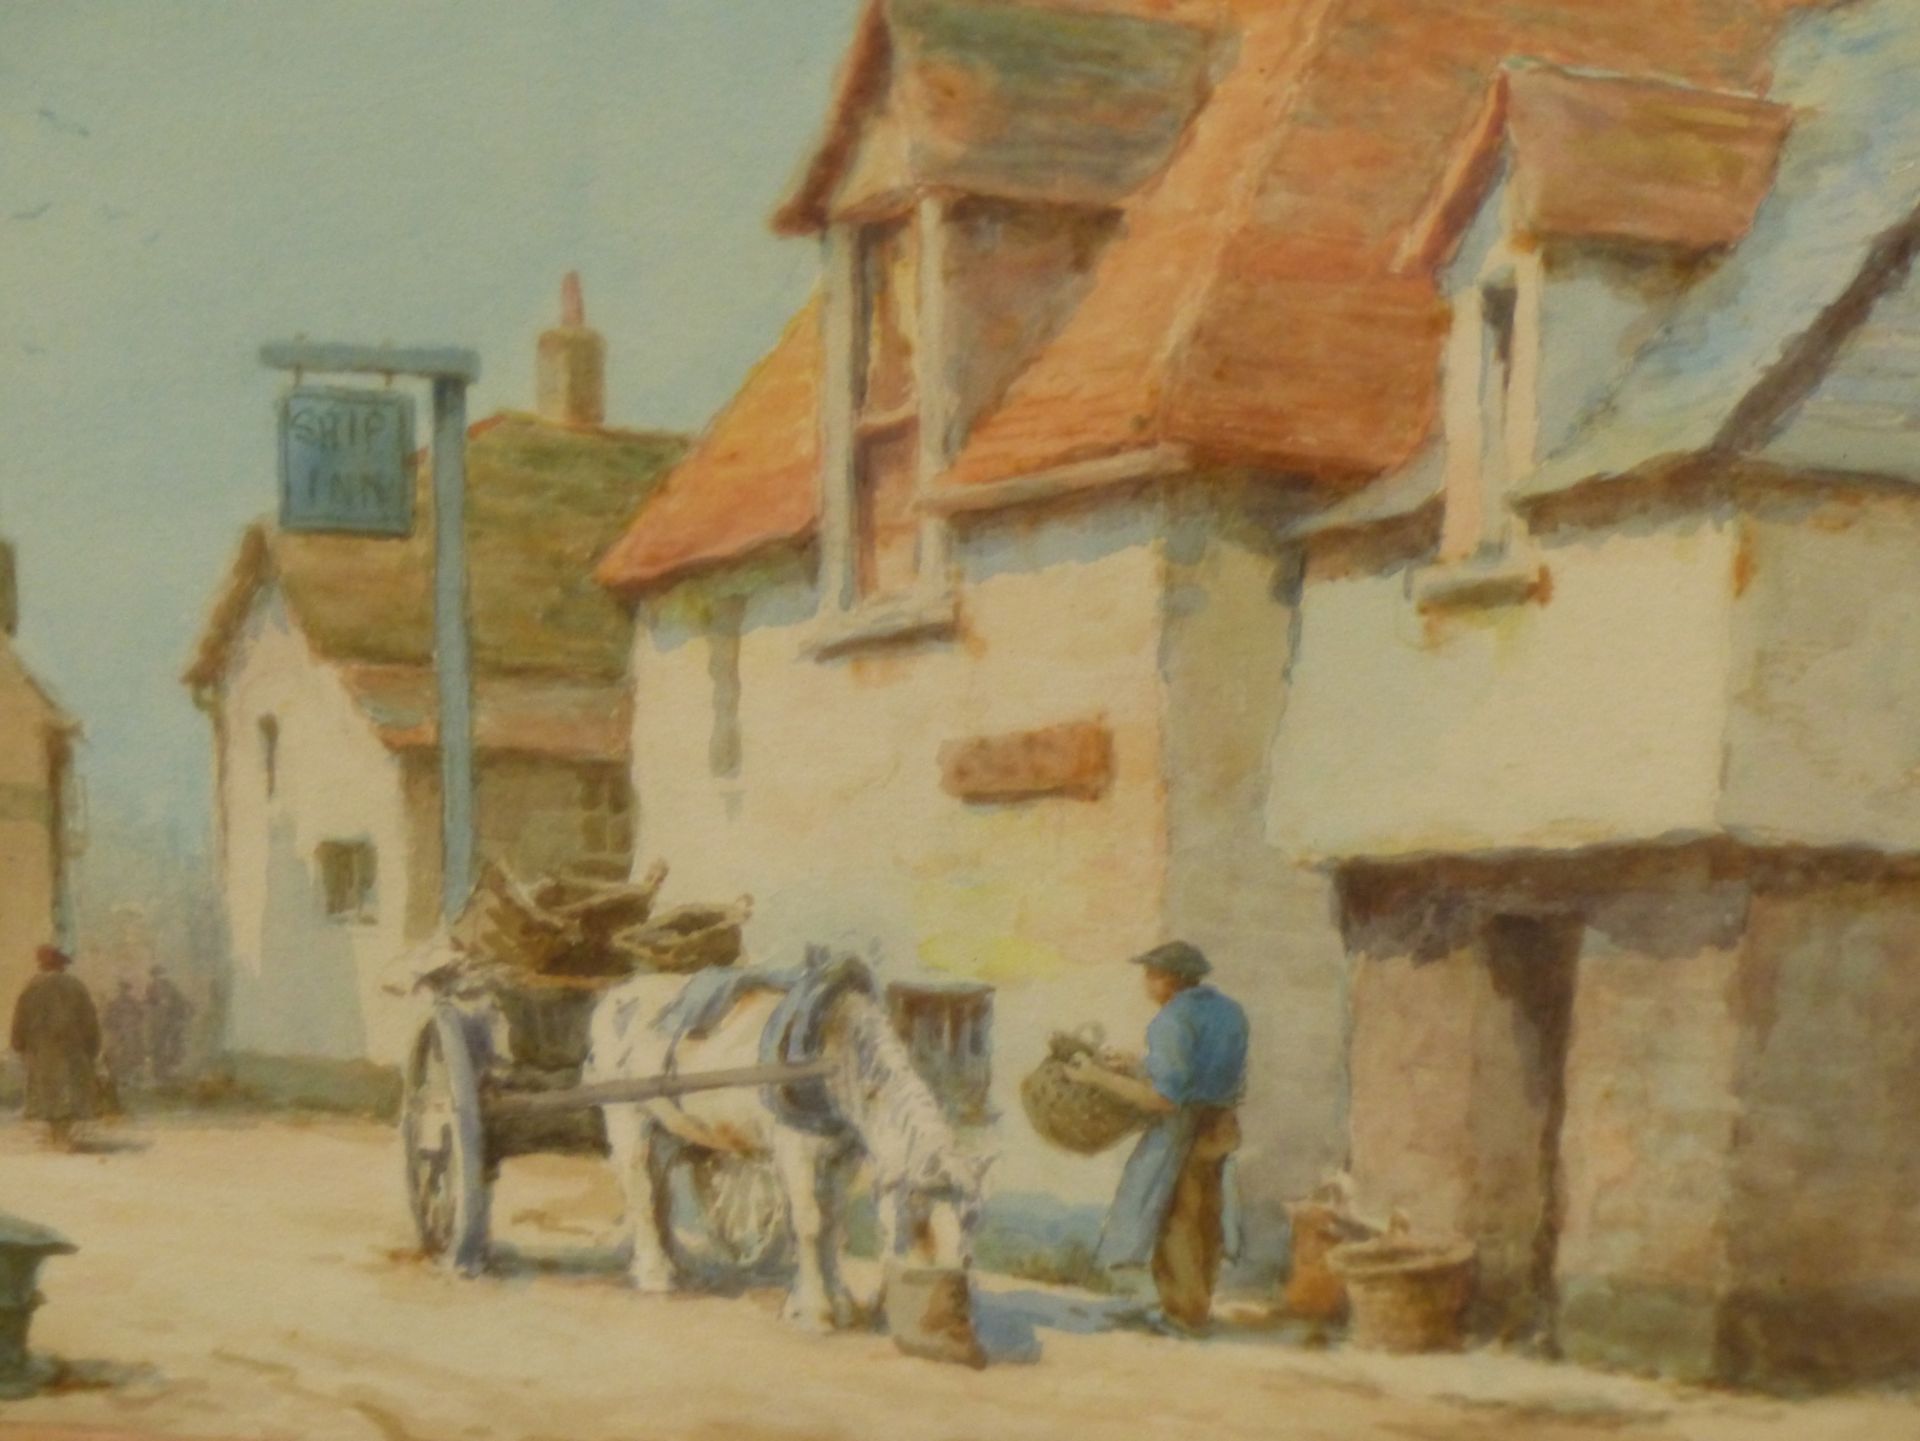 LEWIS MORTIMER (19TH/20TH CENTURY), SHIP INN, PORLOCK, SIGNED, WATERCOLOUR, 25 X 35CM, TOGETHER WITH